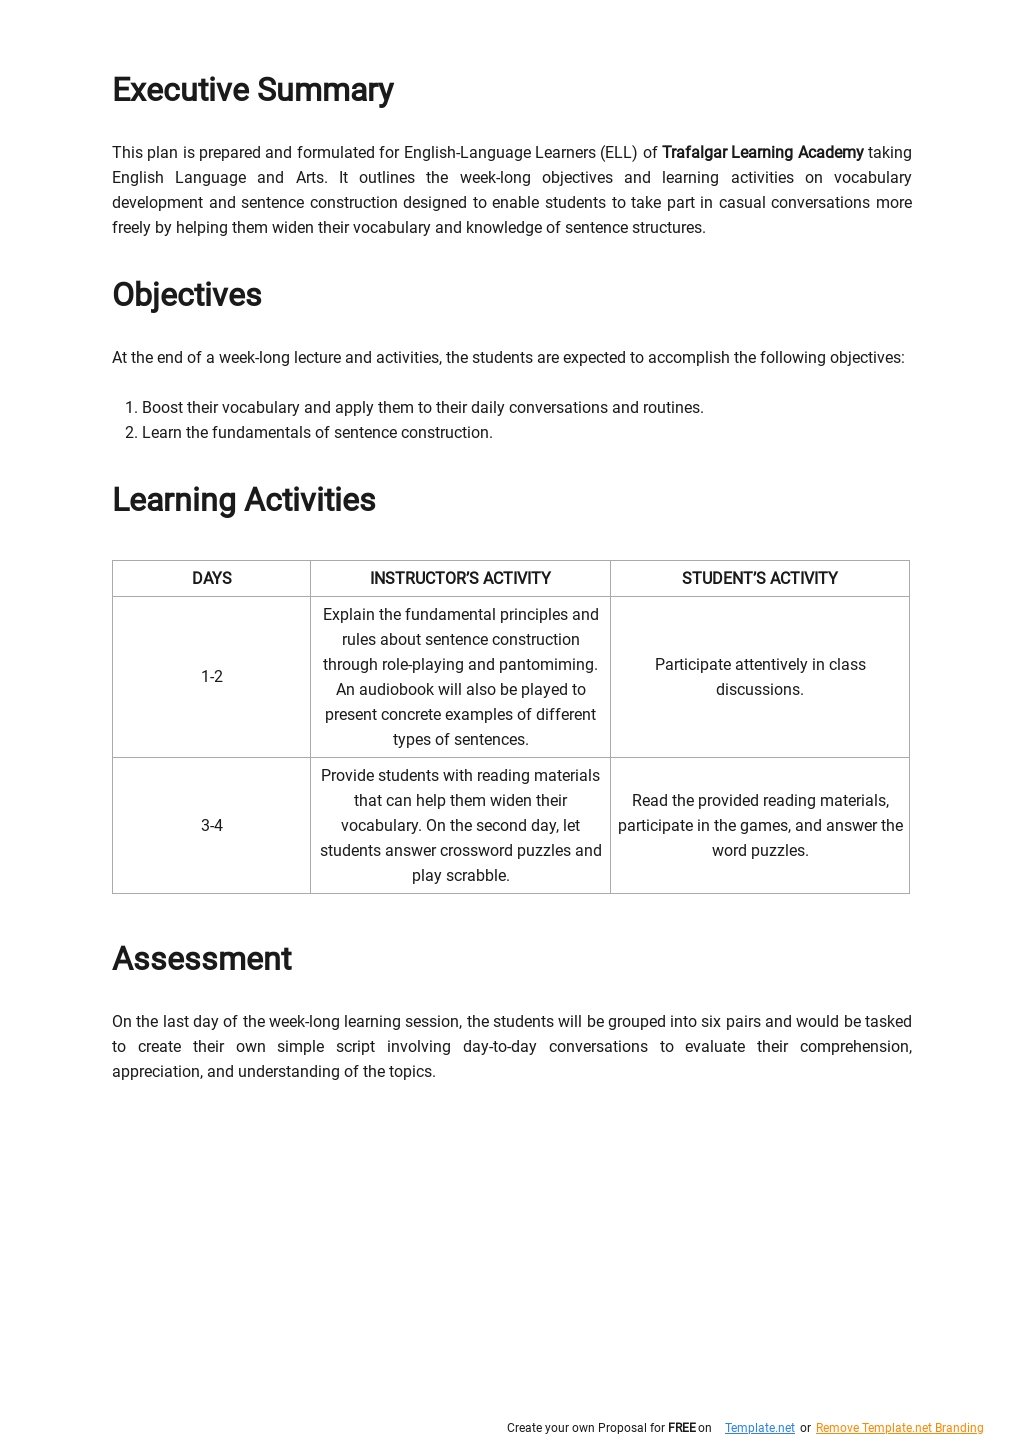 UDL Lesson Plan for ELL Students Template 1.jpe